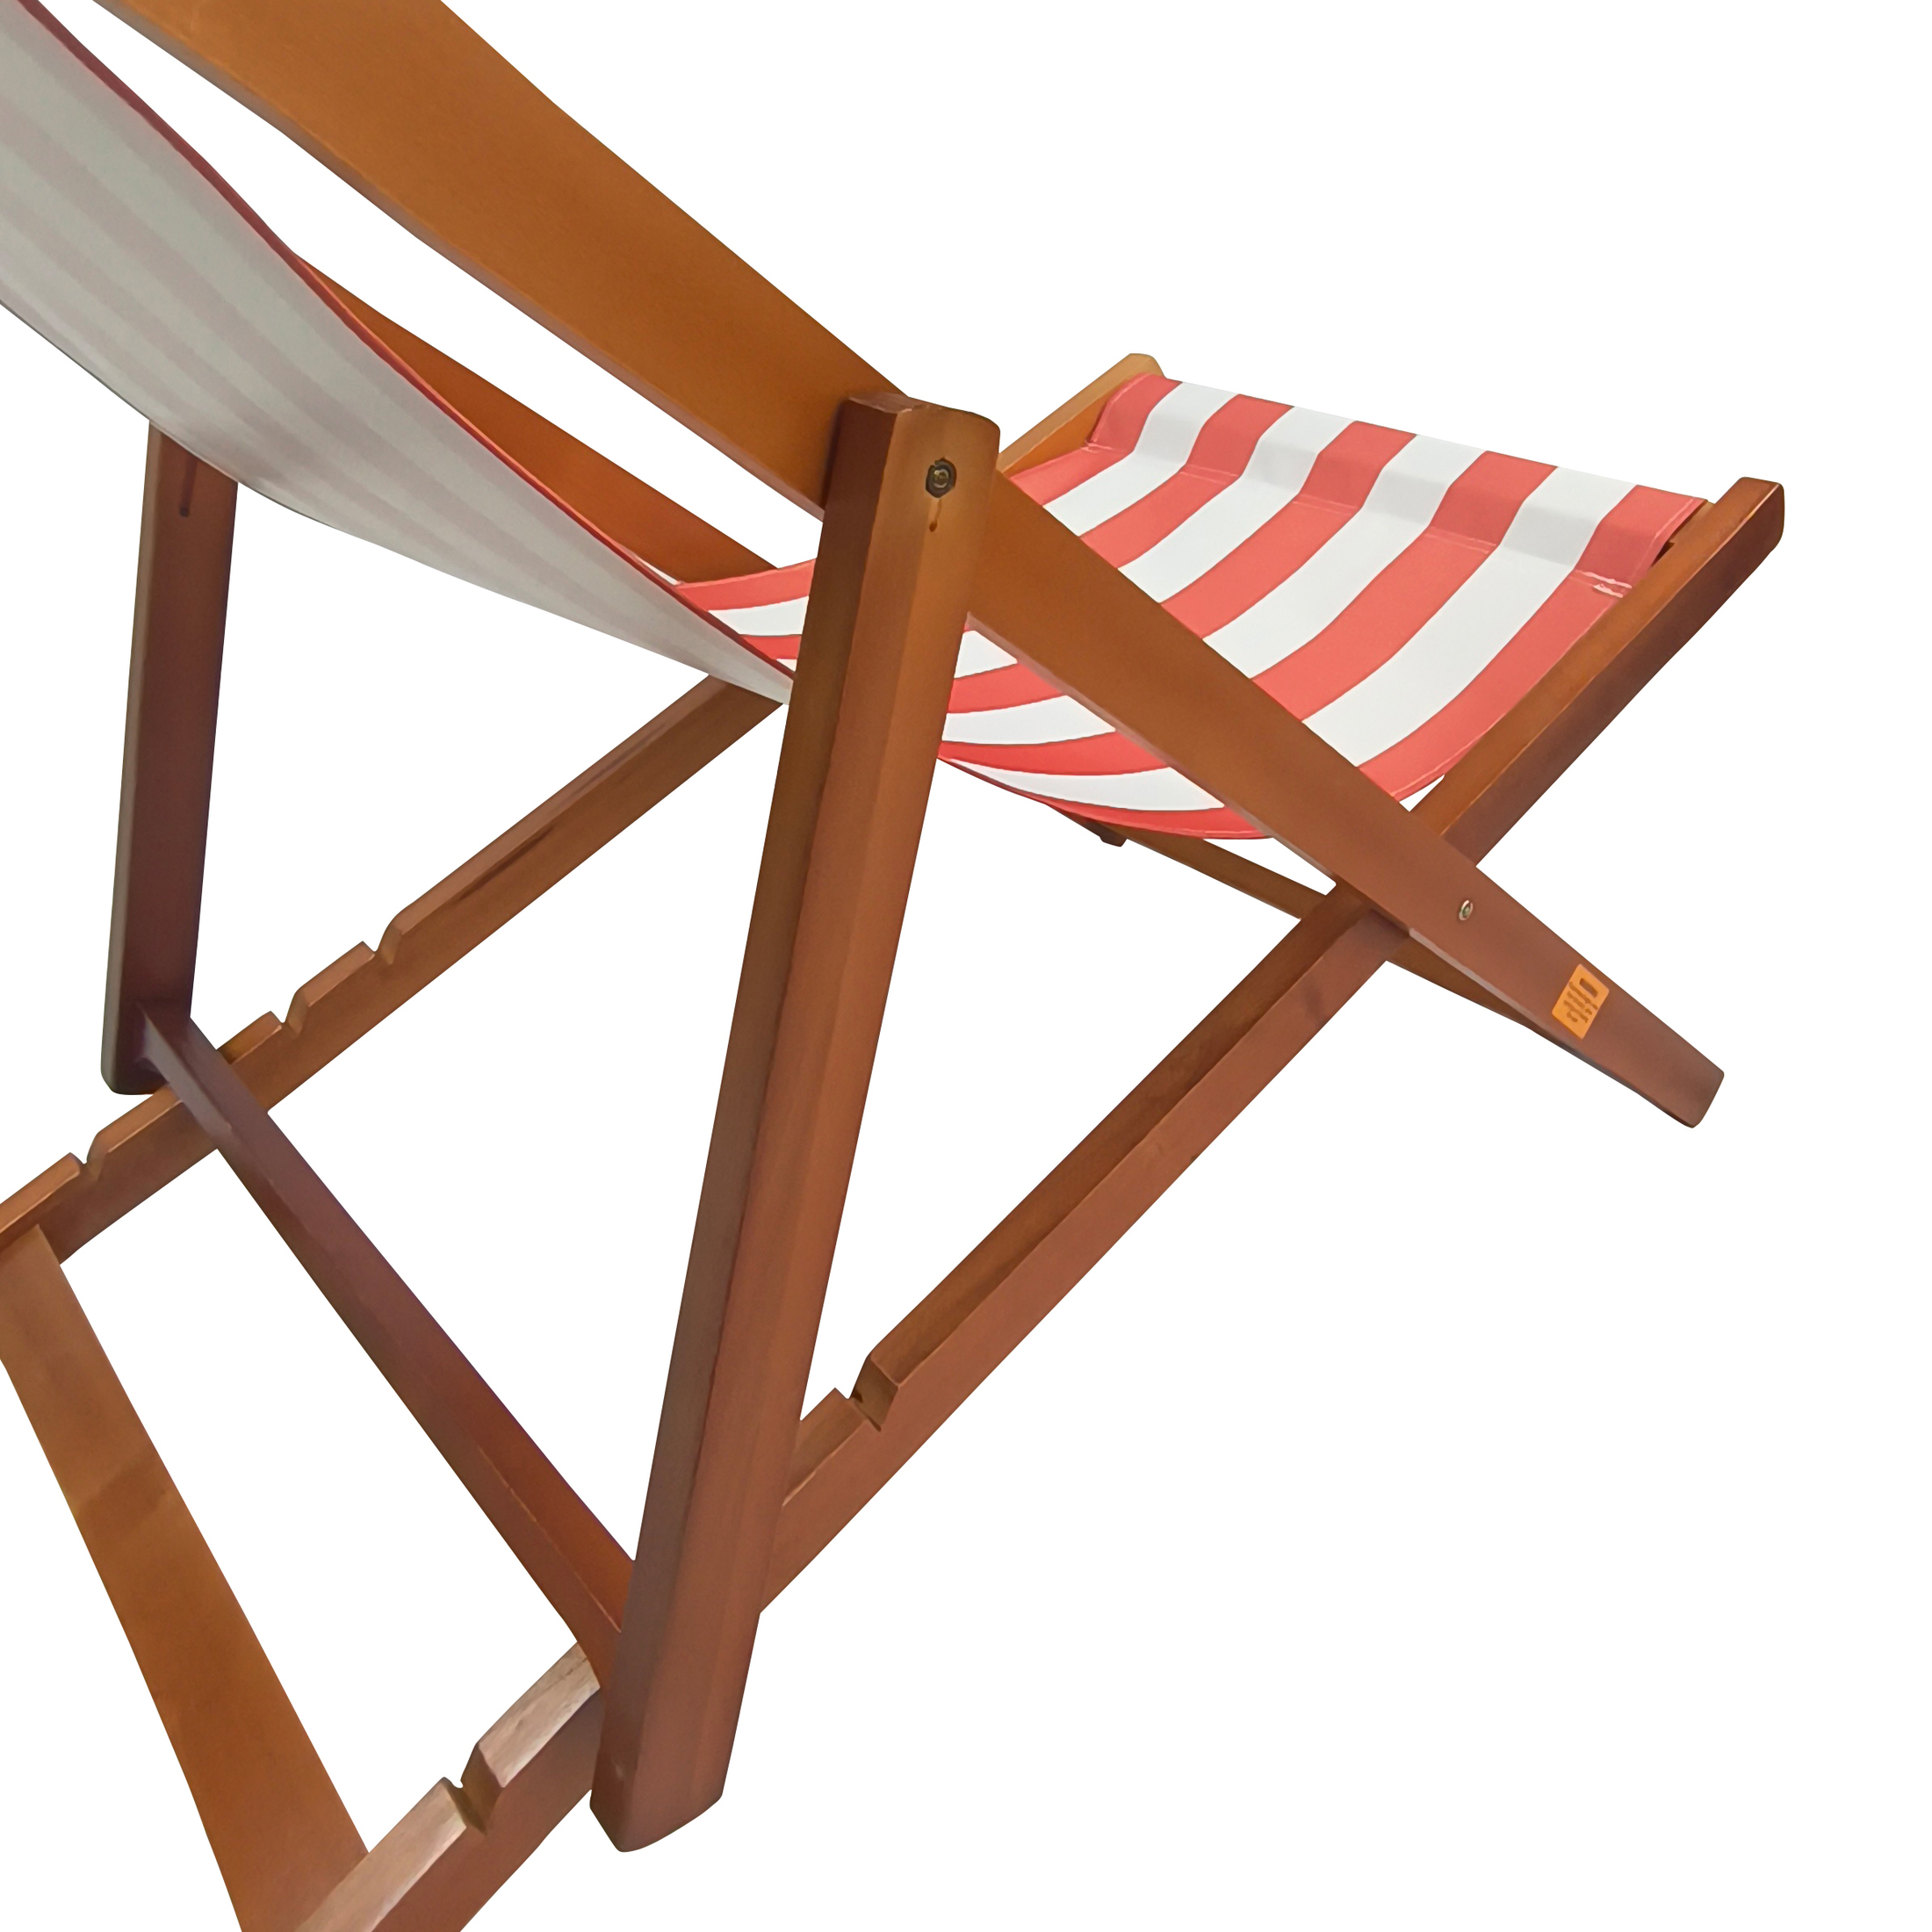 Pouseayar Foldable Sling Chair,Outdoor Beach Chair Chaise Lounge, Orang - image 3 of 7